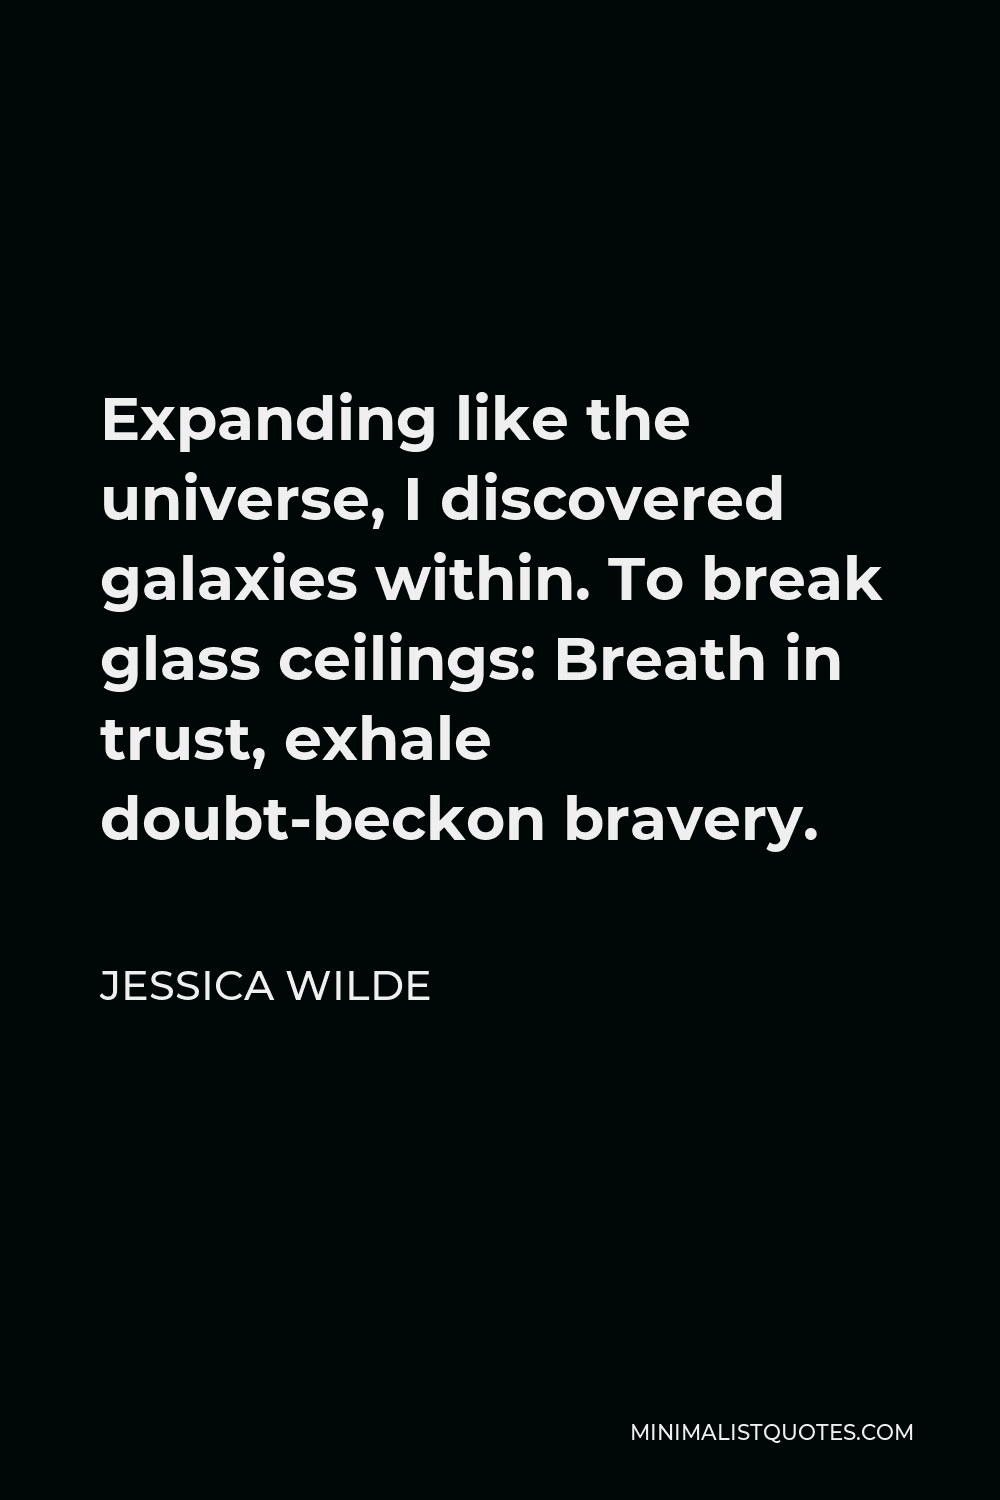 Jessica Wilde Quote - Expanding like the universe, I discovered galaxies within. To break glass ceilings: Breath in trust, exhale doubt-beckon bravery.